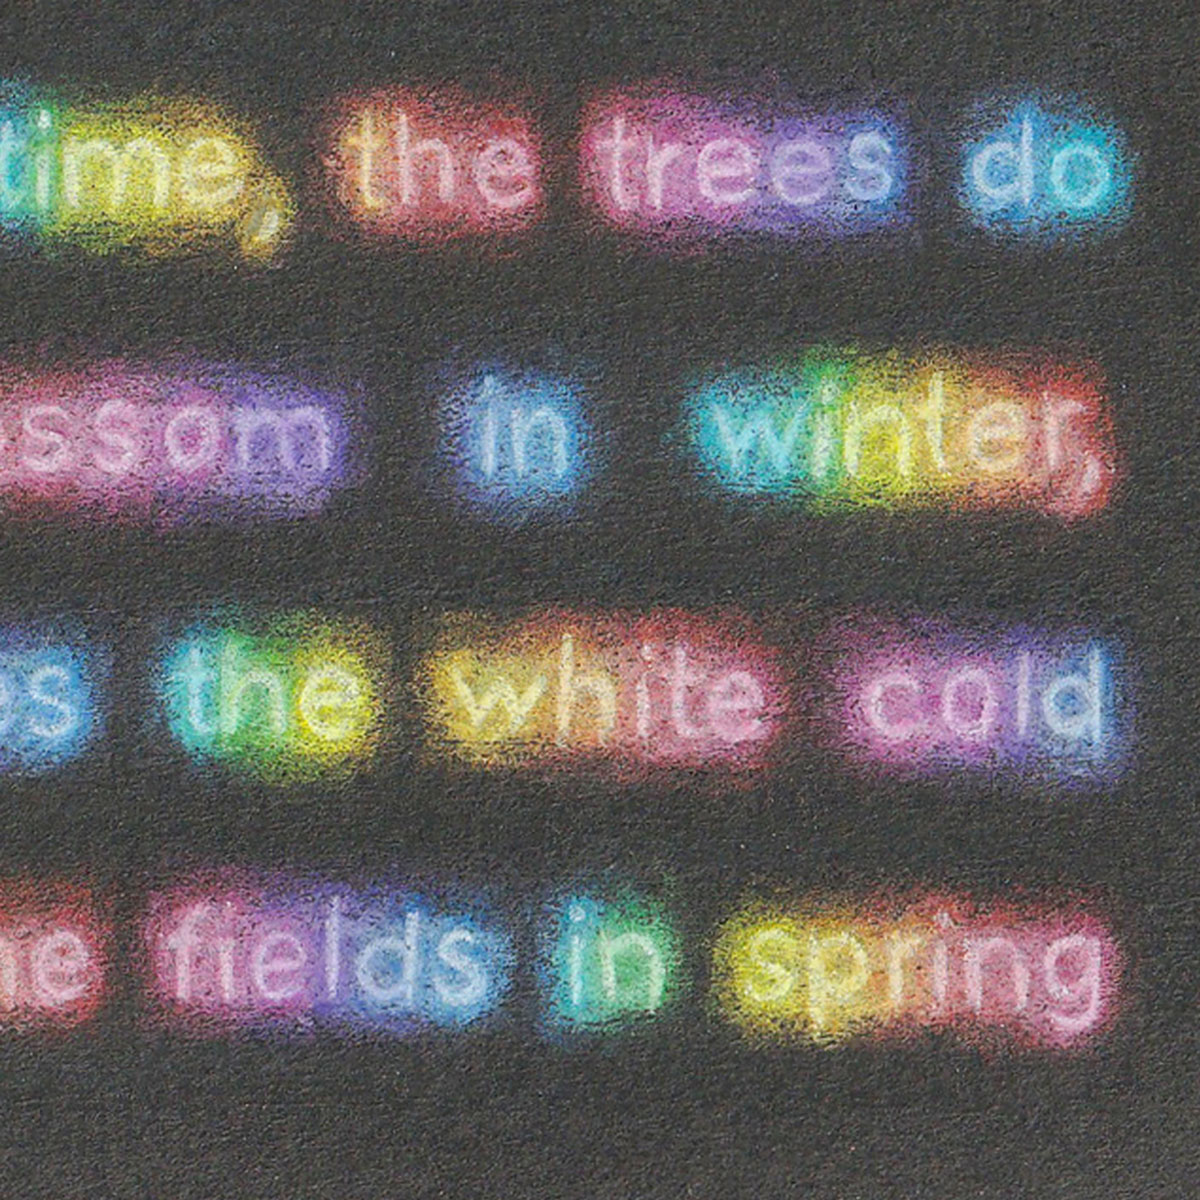 Rainbow colored text against a black background